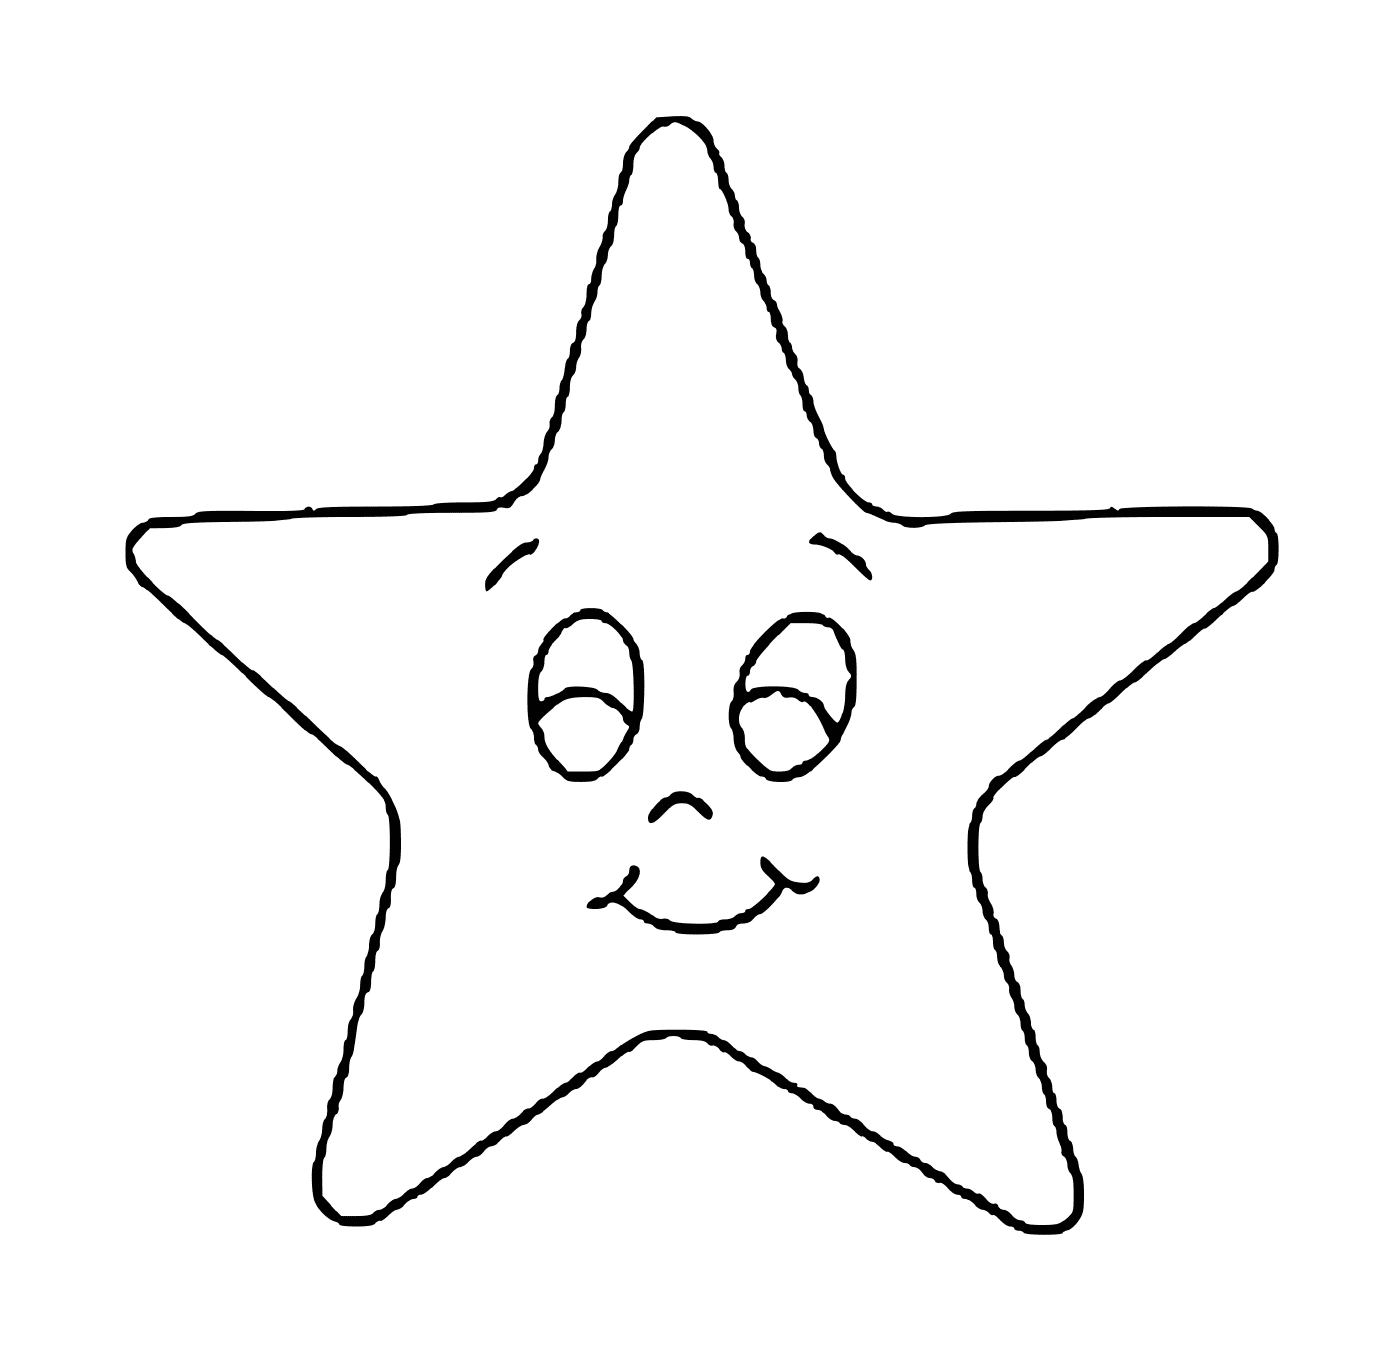  A star with a smiling face 